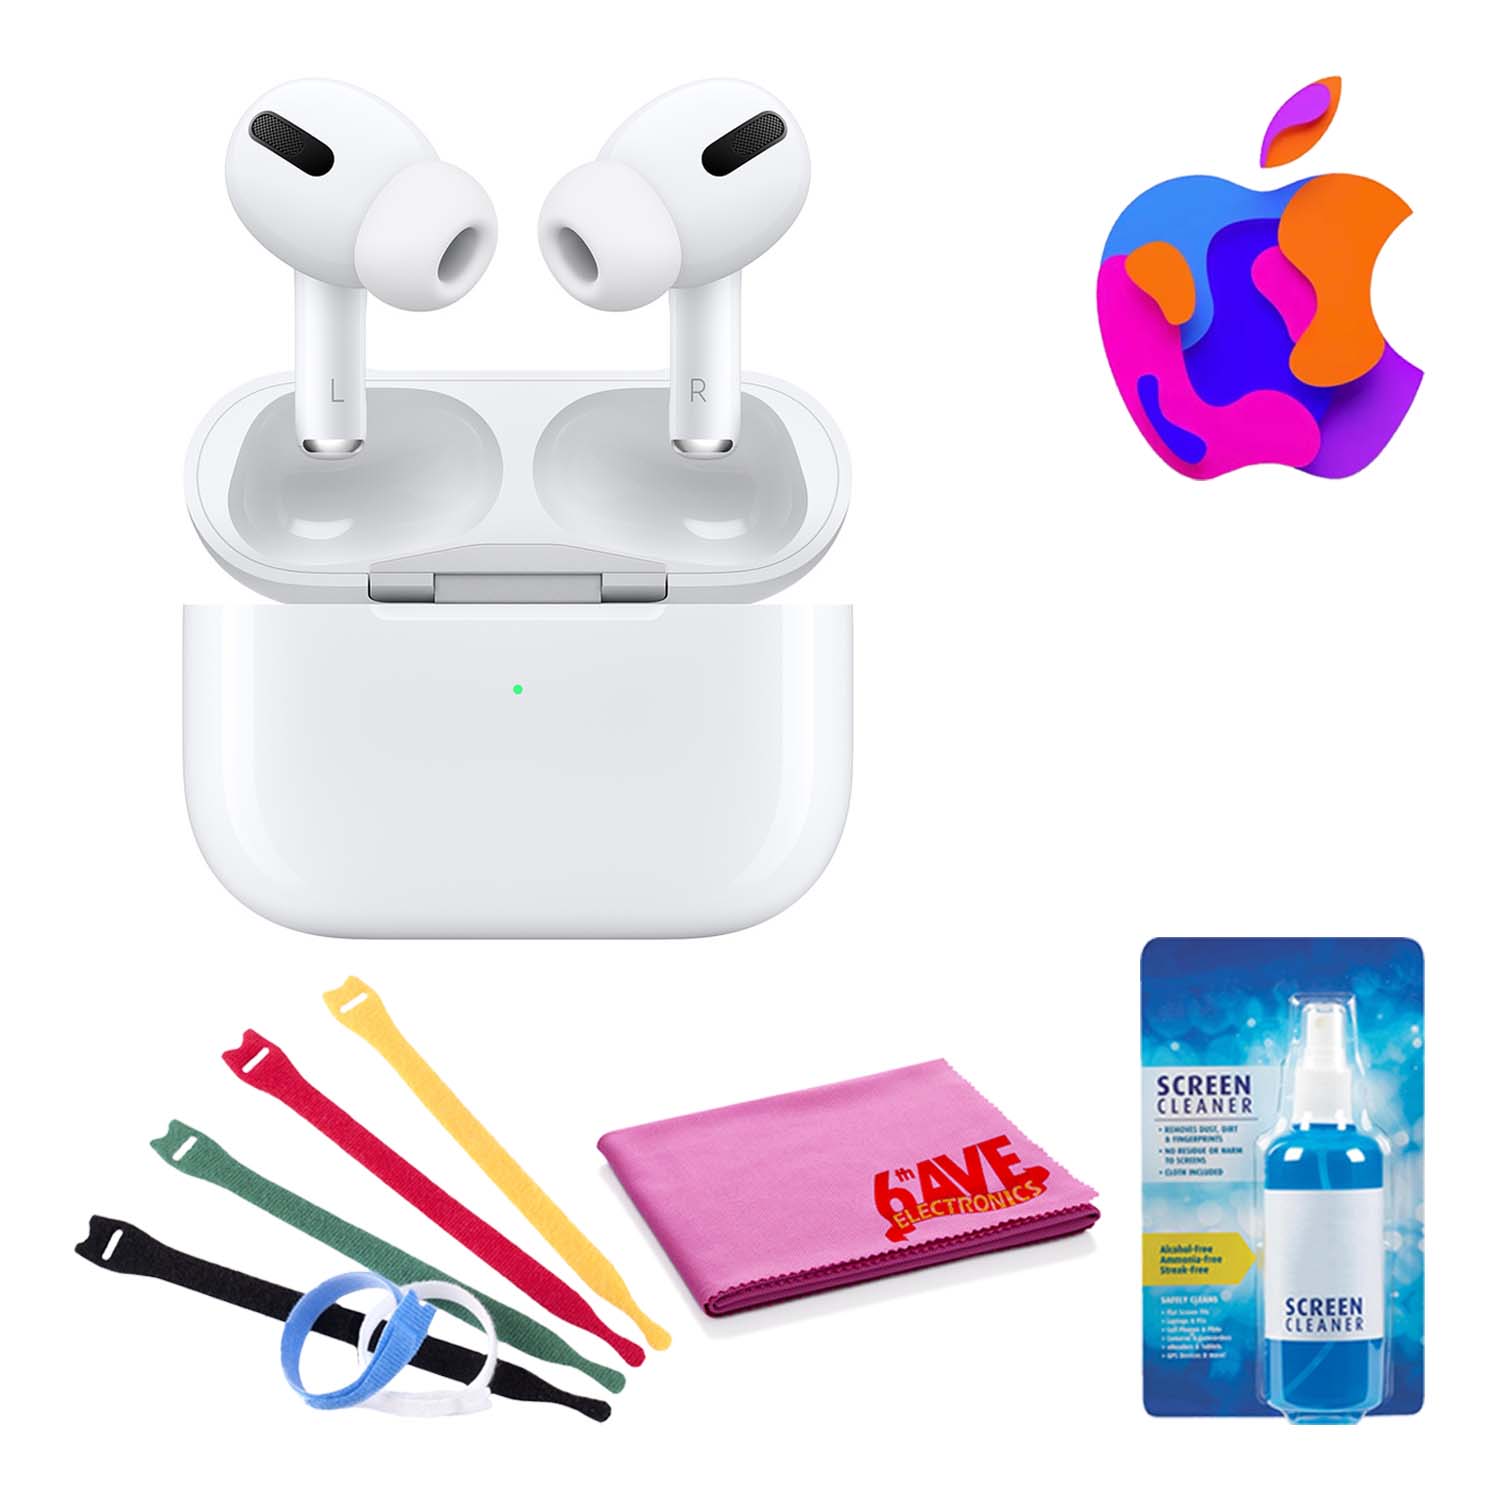 Apple AirPods Pro with Wireless Charging Case Bundle + Cable Ties + More (New-Open Box) - image 1 of 6